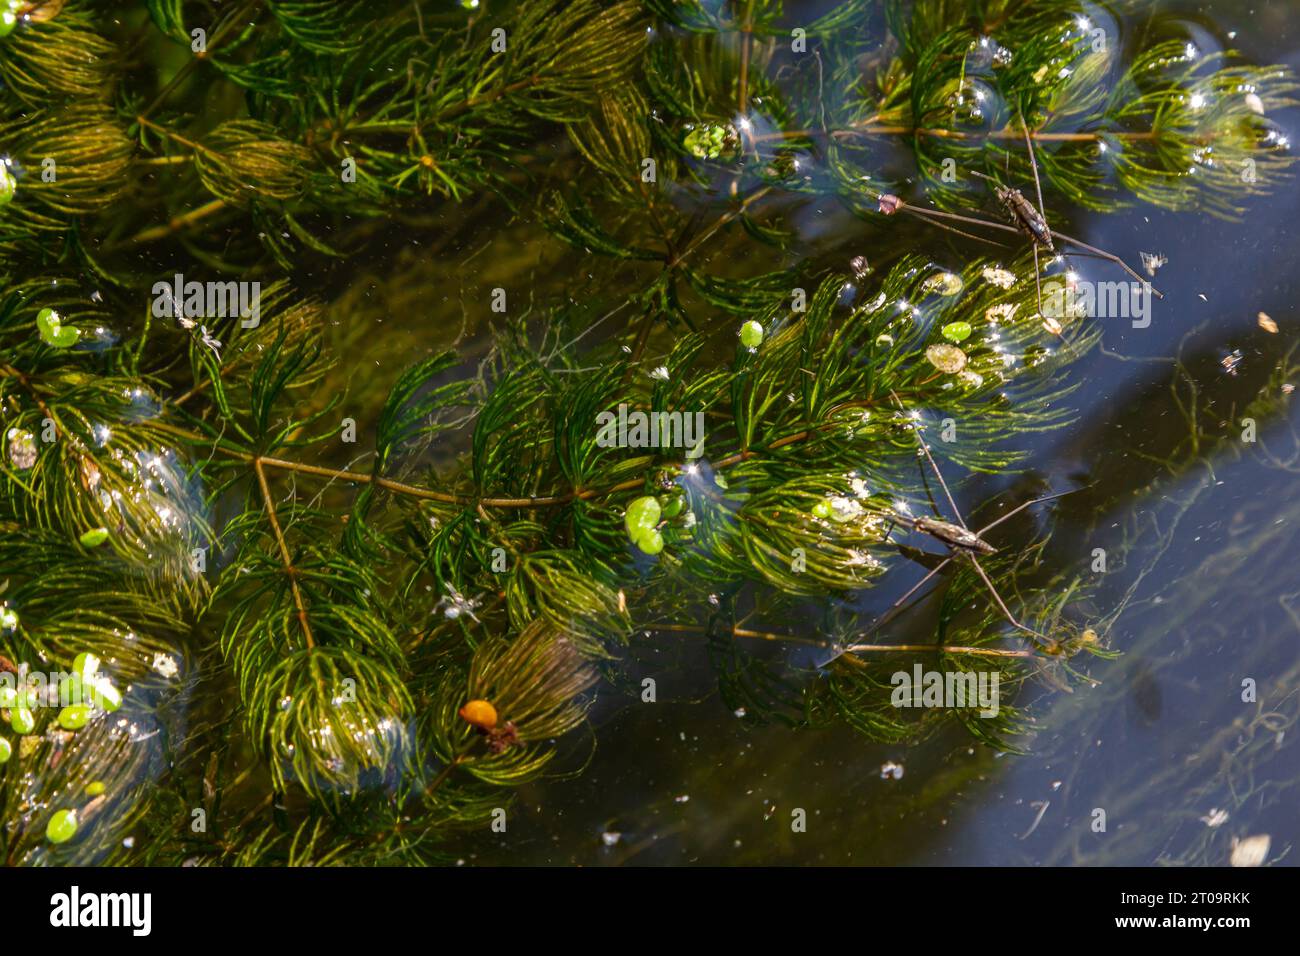 Close up of the aquatic plant Ceratophyllum coontails, hornworts floating on the surface of the water in a pond. Europe. Stock Photo